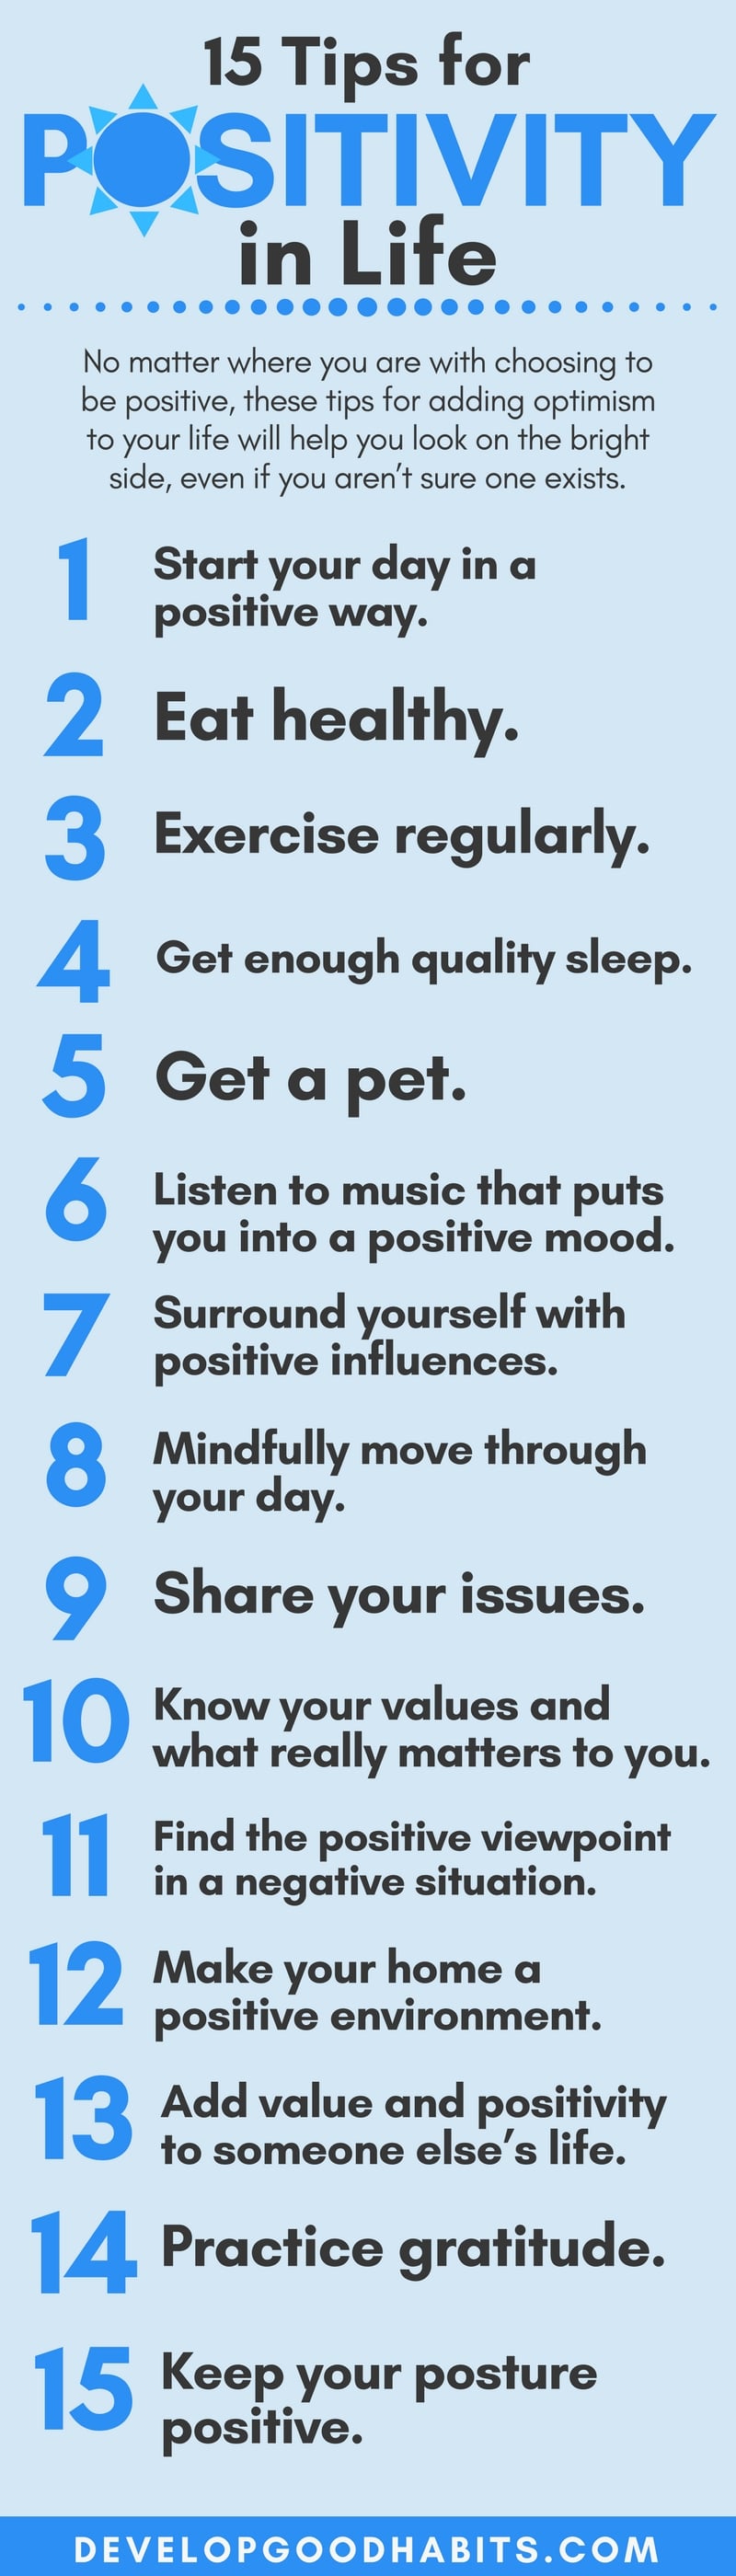 15 Tips on How To Be More Positive in Life | how to stay positive | Positivity - How to increase positivity | #positive #positivity #infographic #beingpositive #optimism #optimistic #hope #confidence #positiveattitude #cheer #cheerfulness #attitude #selfcare #selfhelp #selflove